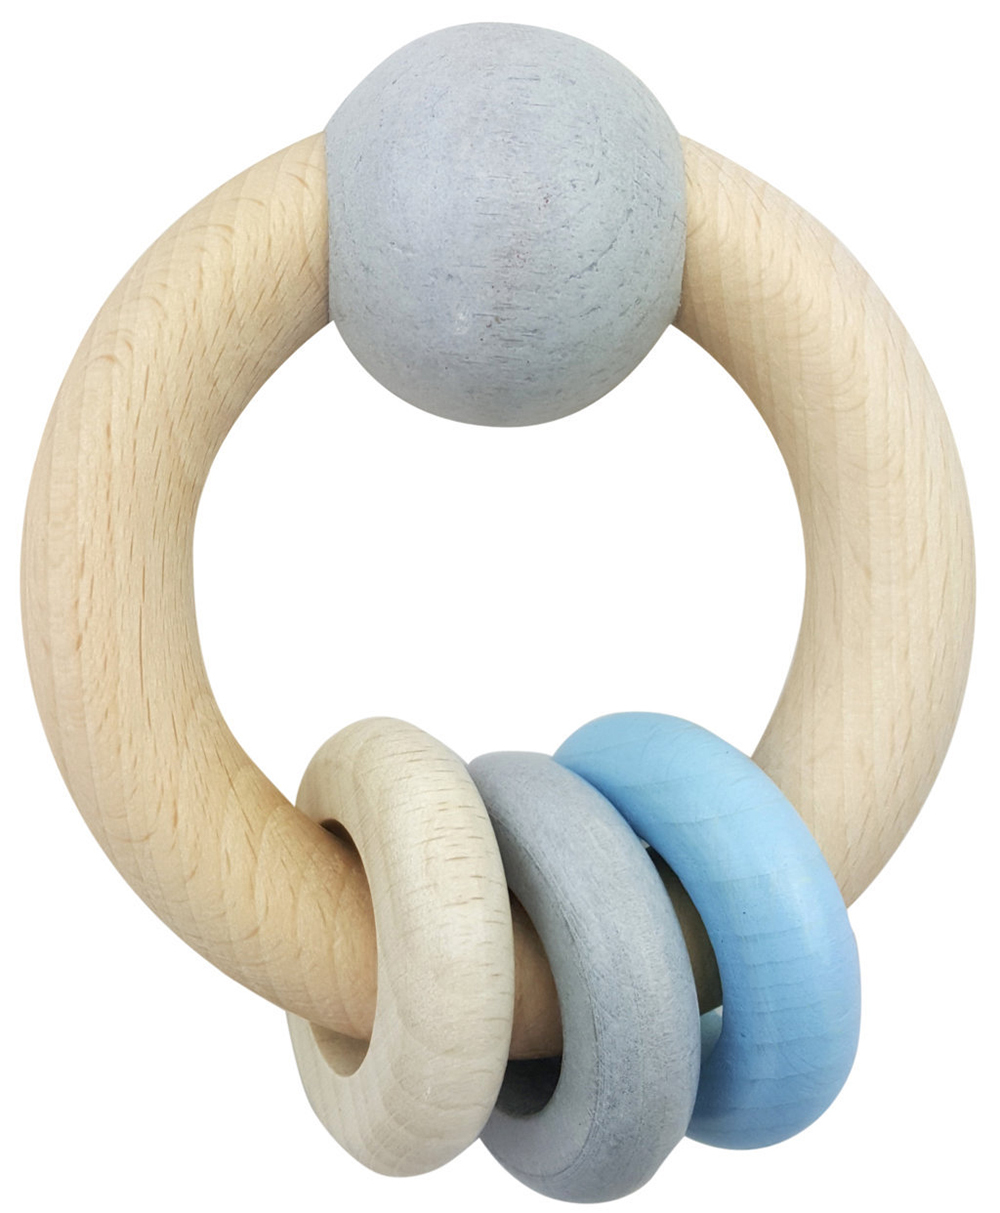 Hess Wooden Baby Toy - Rattle Ring